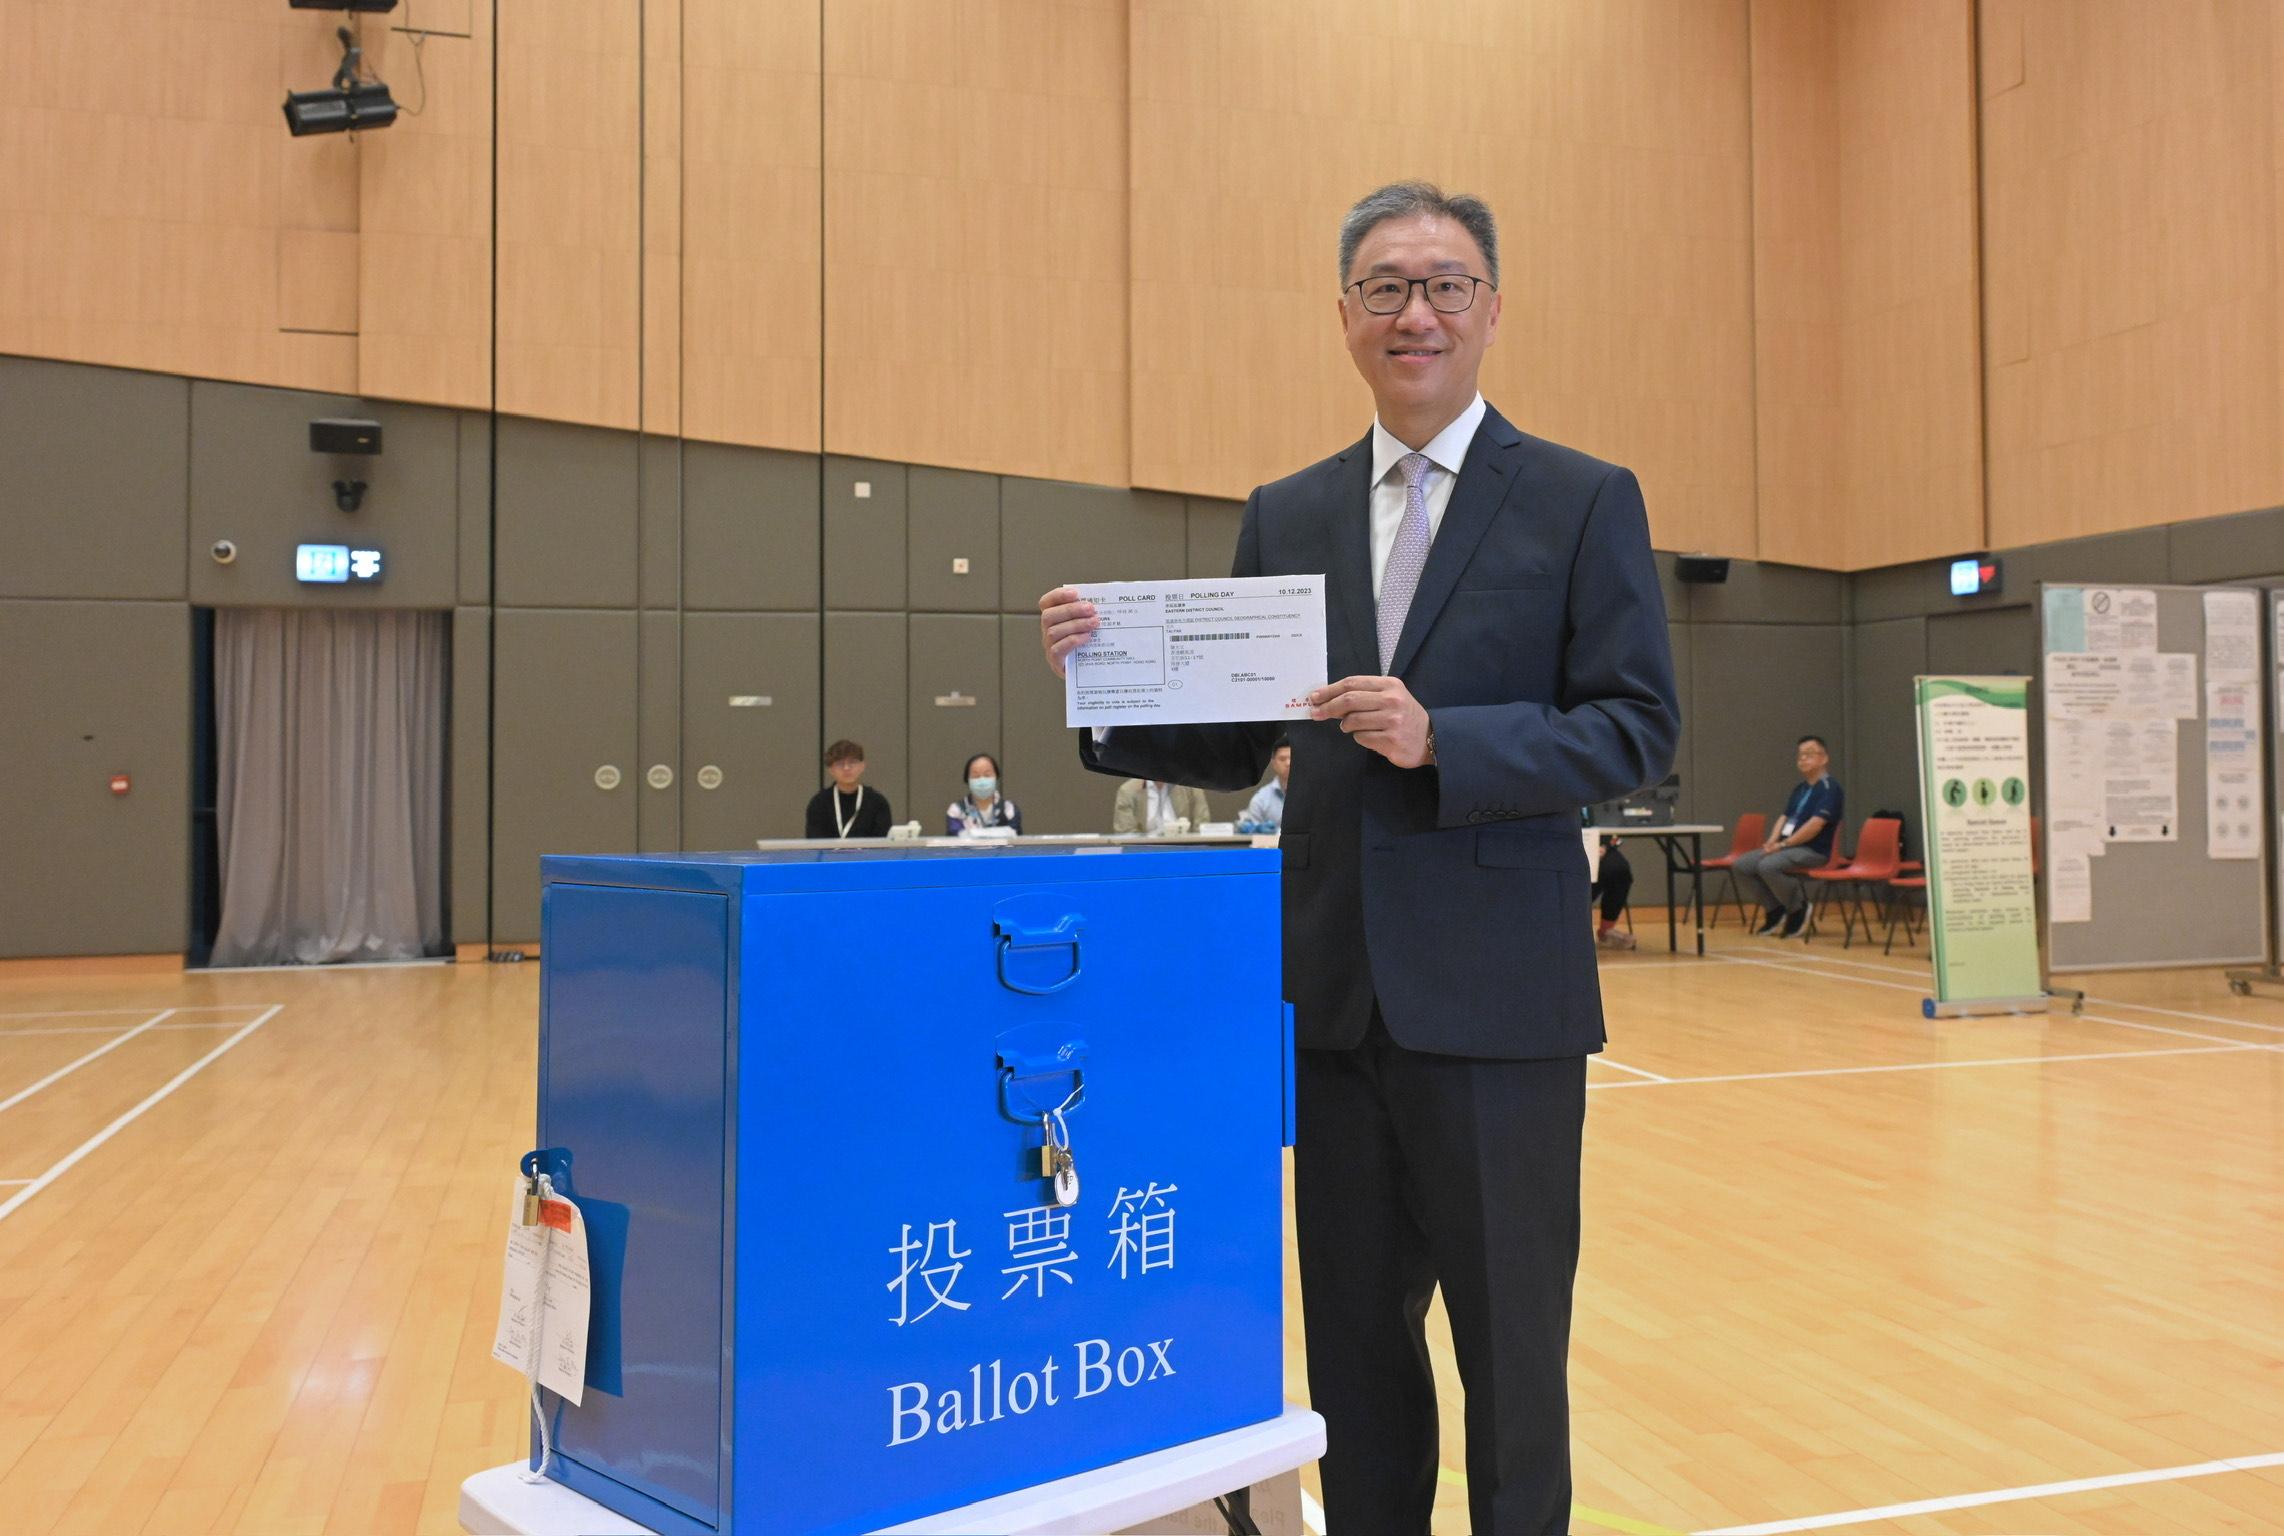 The Chairman of the Electoral Affairs Commission, Mr Justice David Lok, demonstrated the proper polling procedures of the District Council Ordinary Election during his visit to a mock polling station at the North Point Community Hall today (December 5). Photo shows Mr Justice Lok showing a sample of the poll card for District Council geographical constituencies.